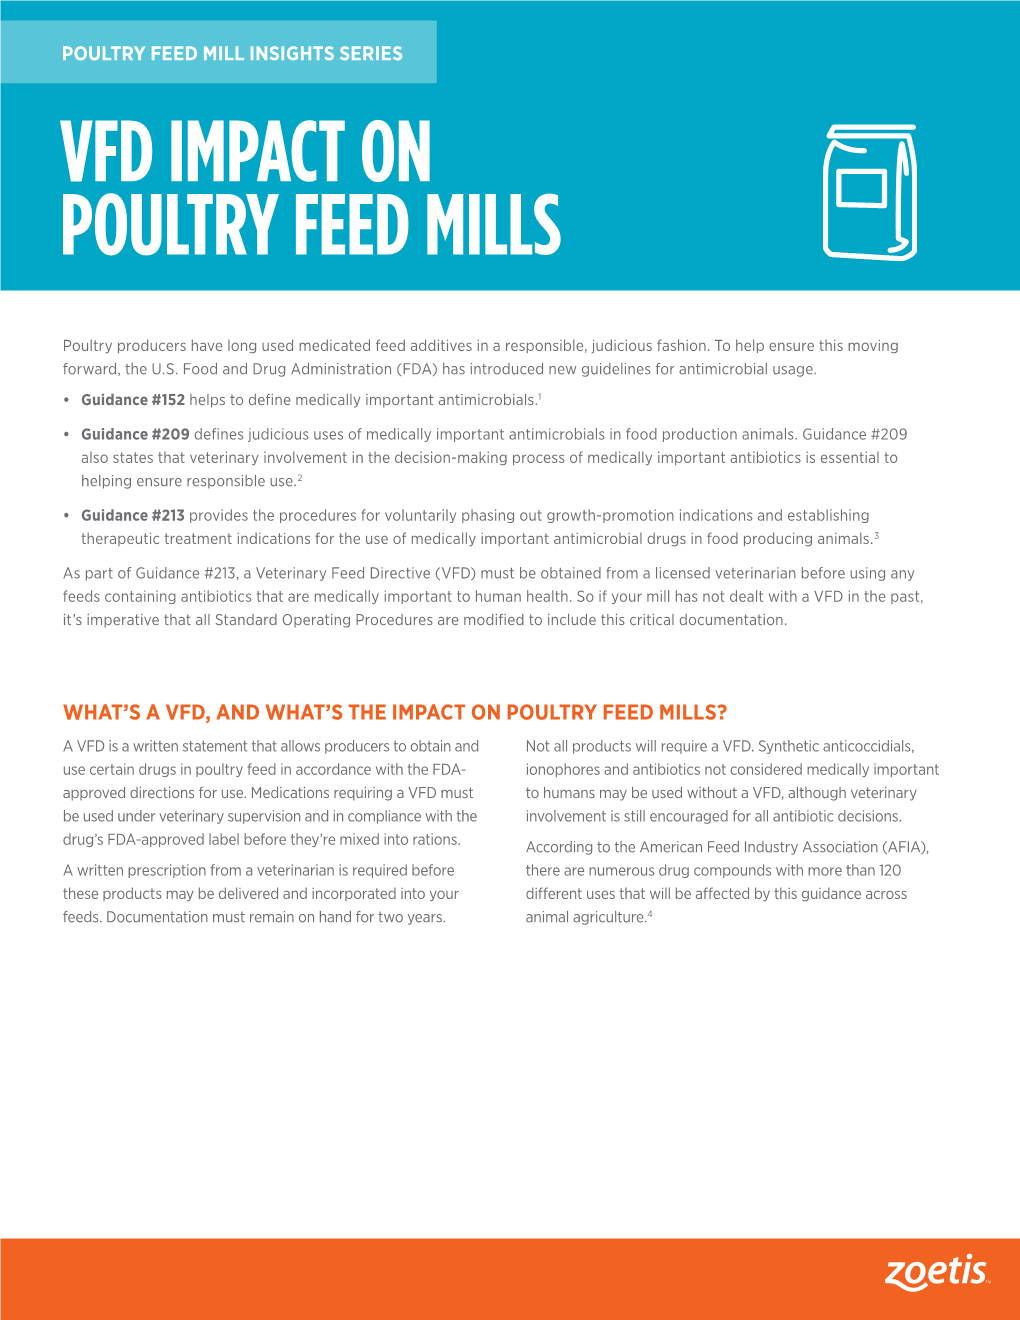 Vfd Impact on Poultry Feed Mills